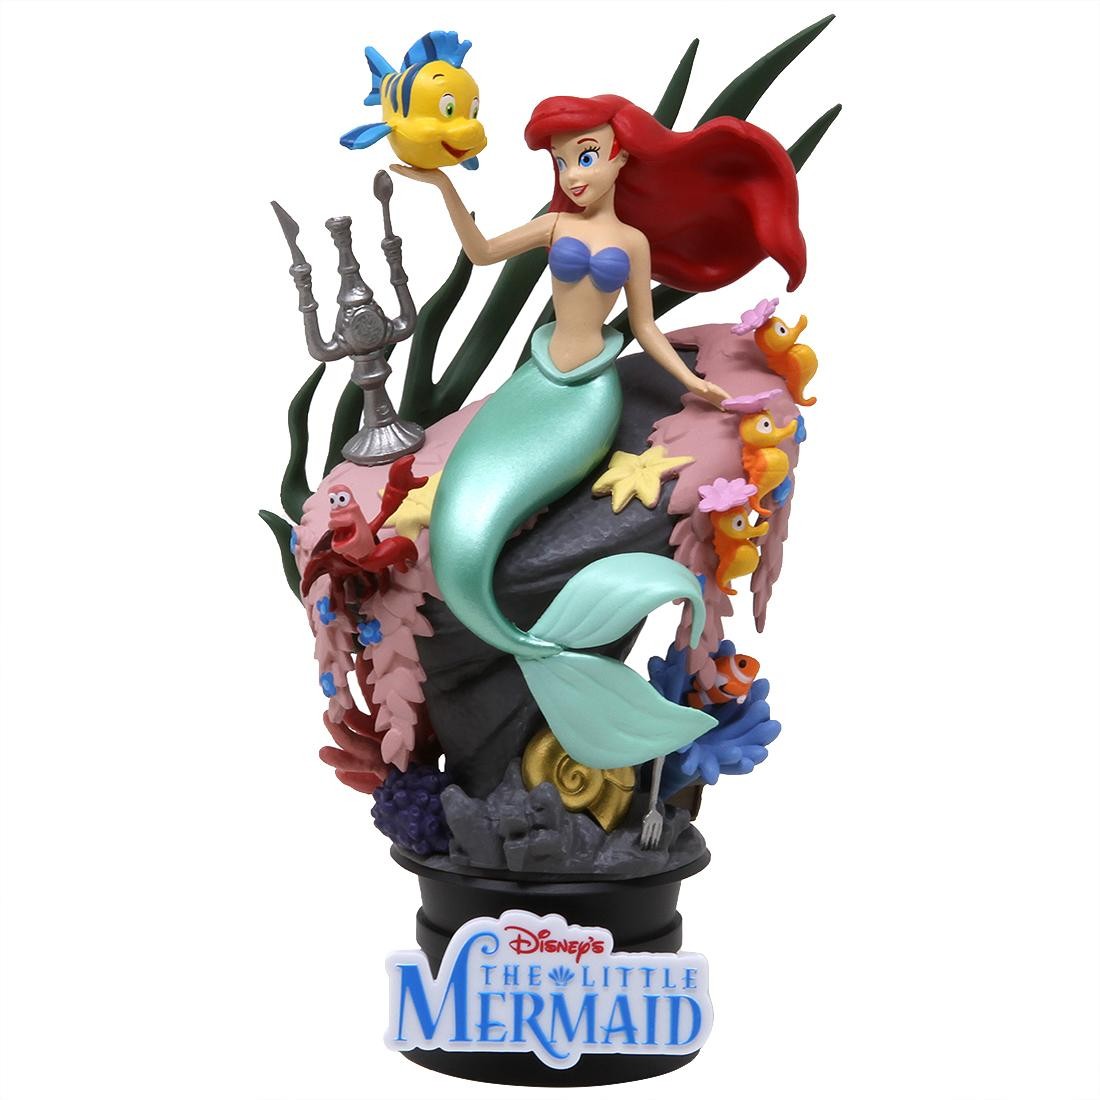 Beast Kingdom The Little Mermaid Ds-012 D-stage Series Statue for sale online 